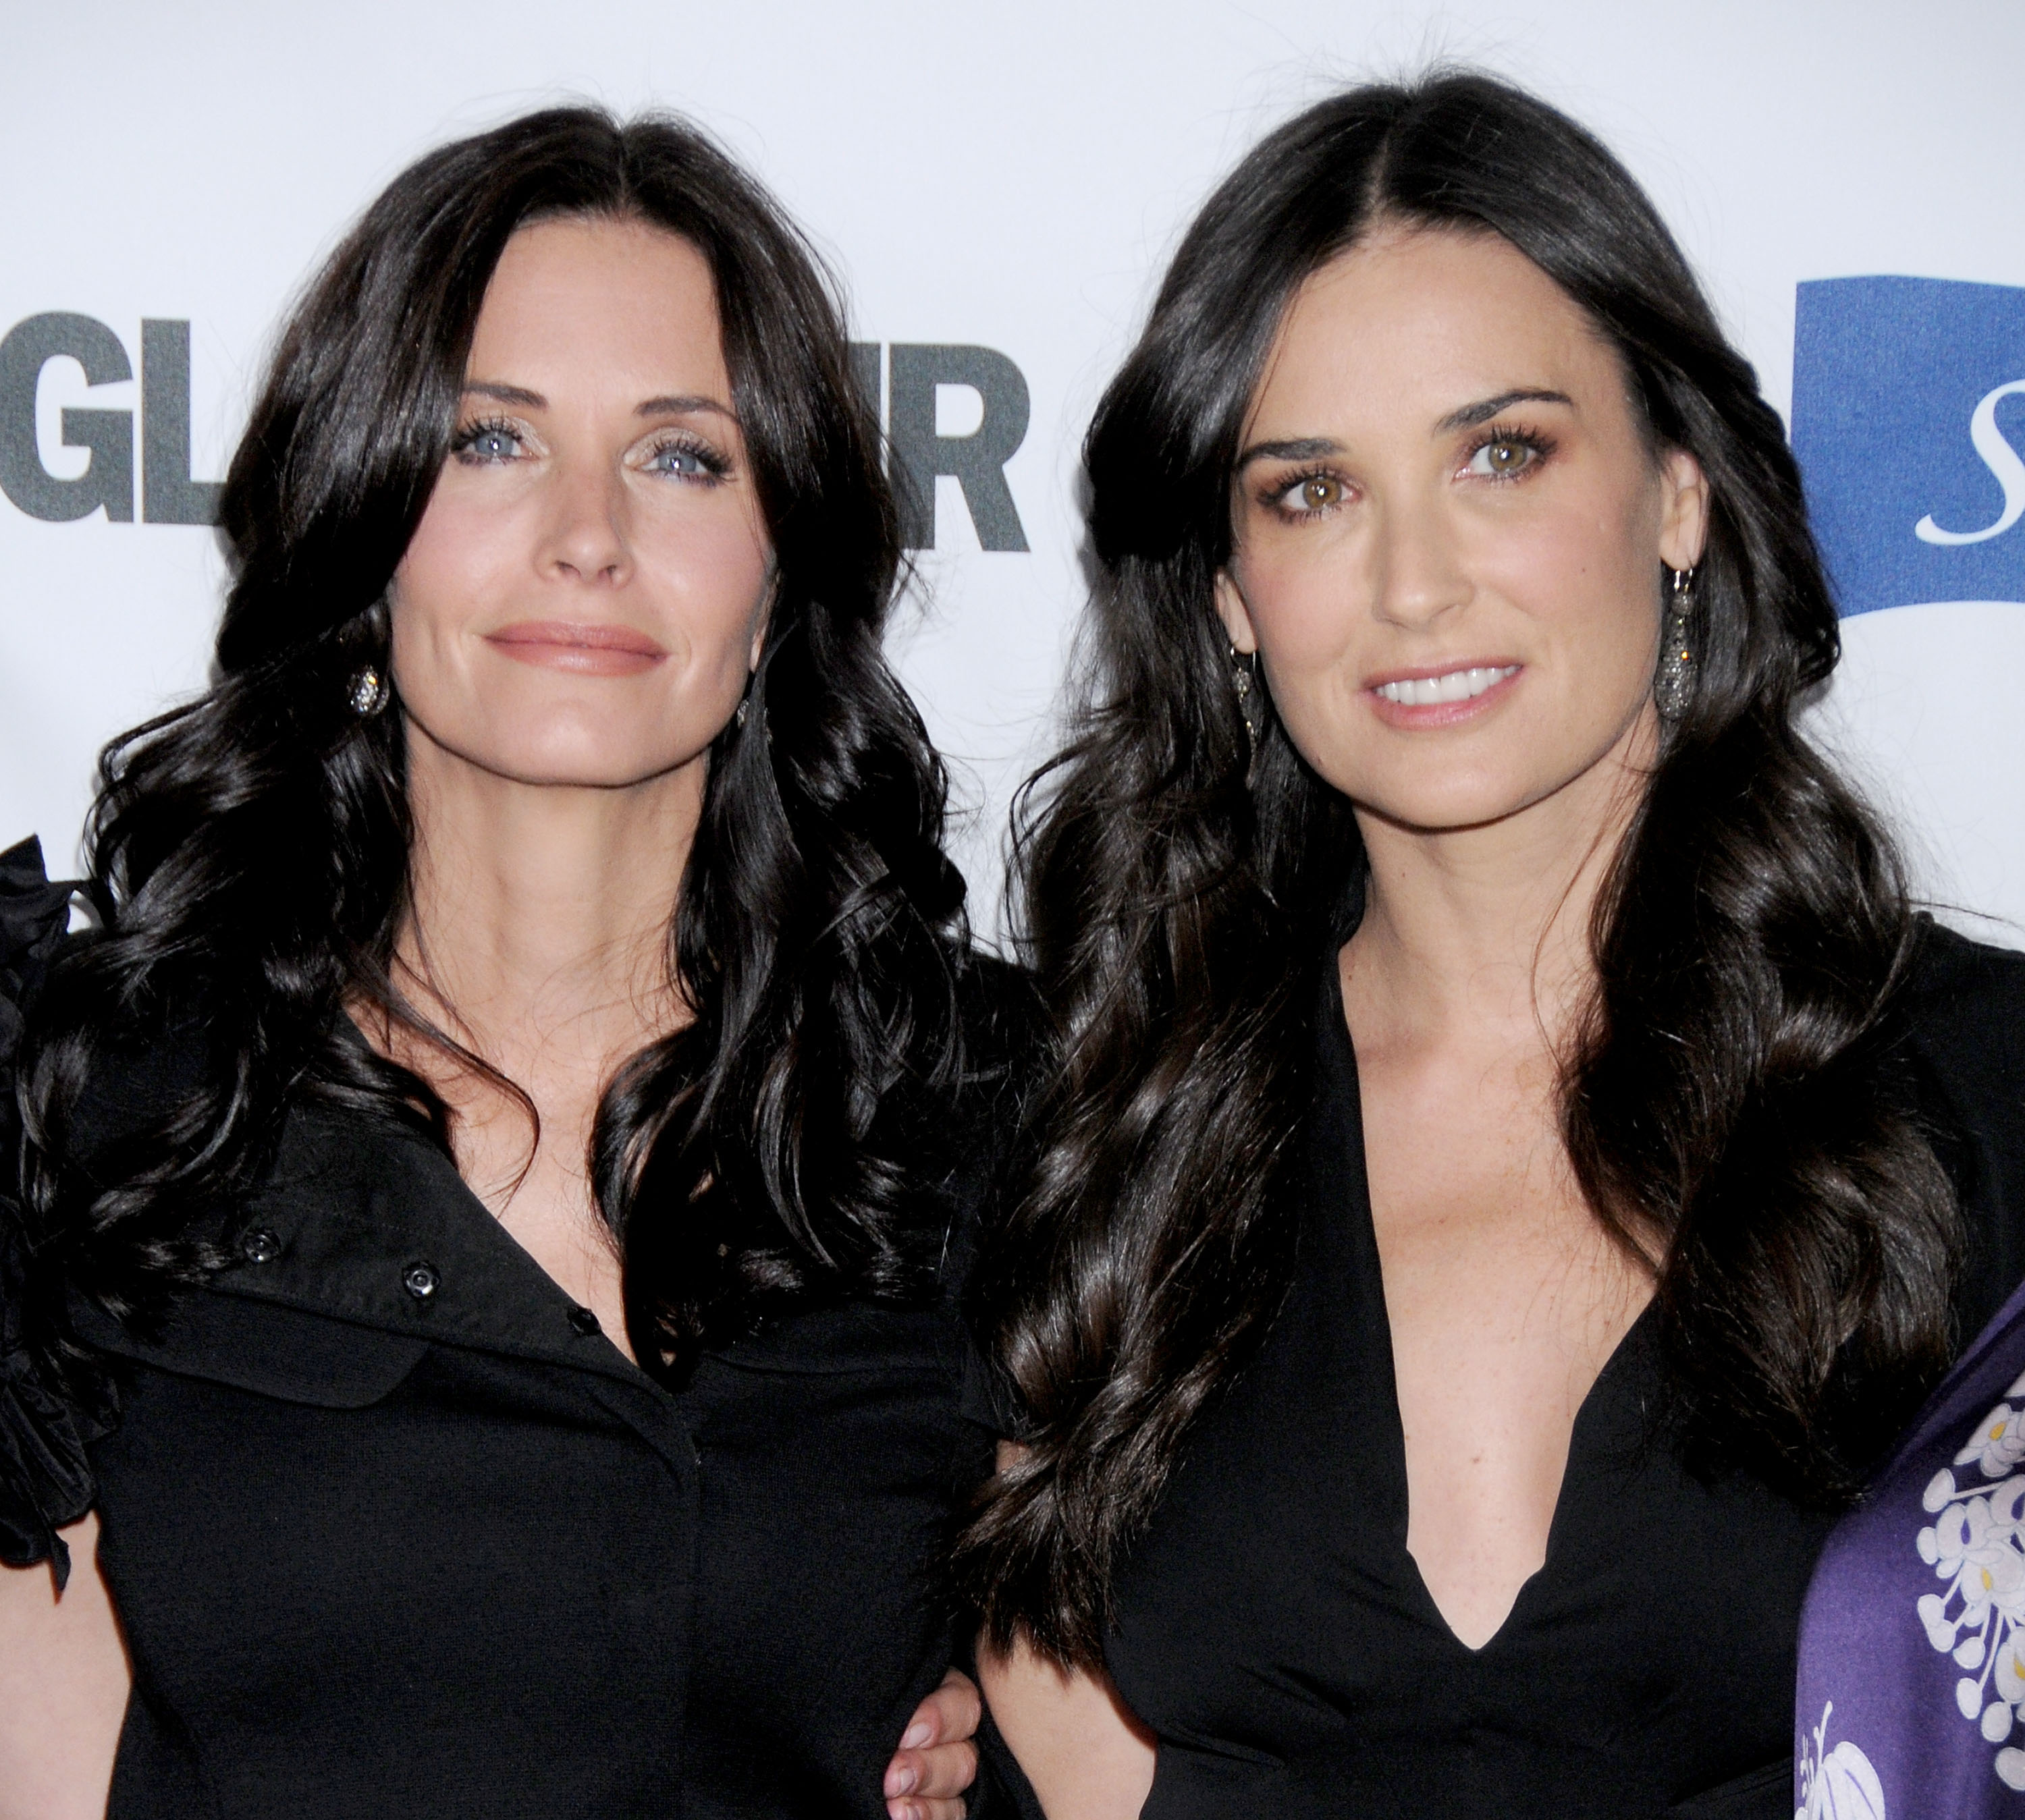 Demi Moore and Courteney Cox on October 14, 2008 in Los Angeles, California | Source: Getty Images